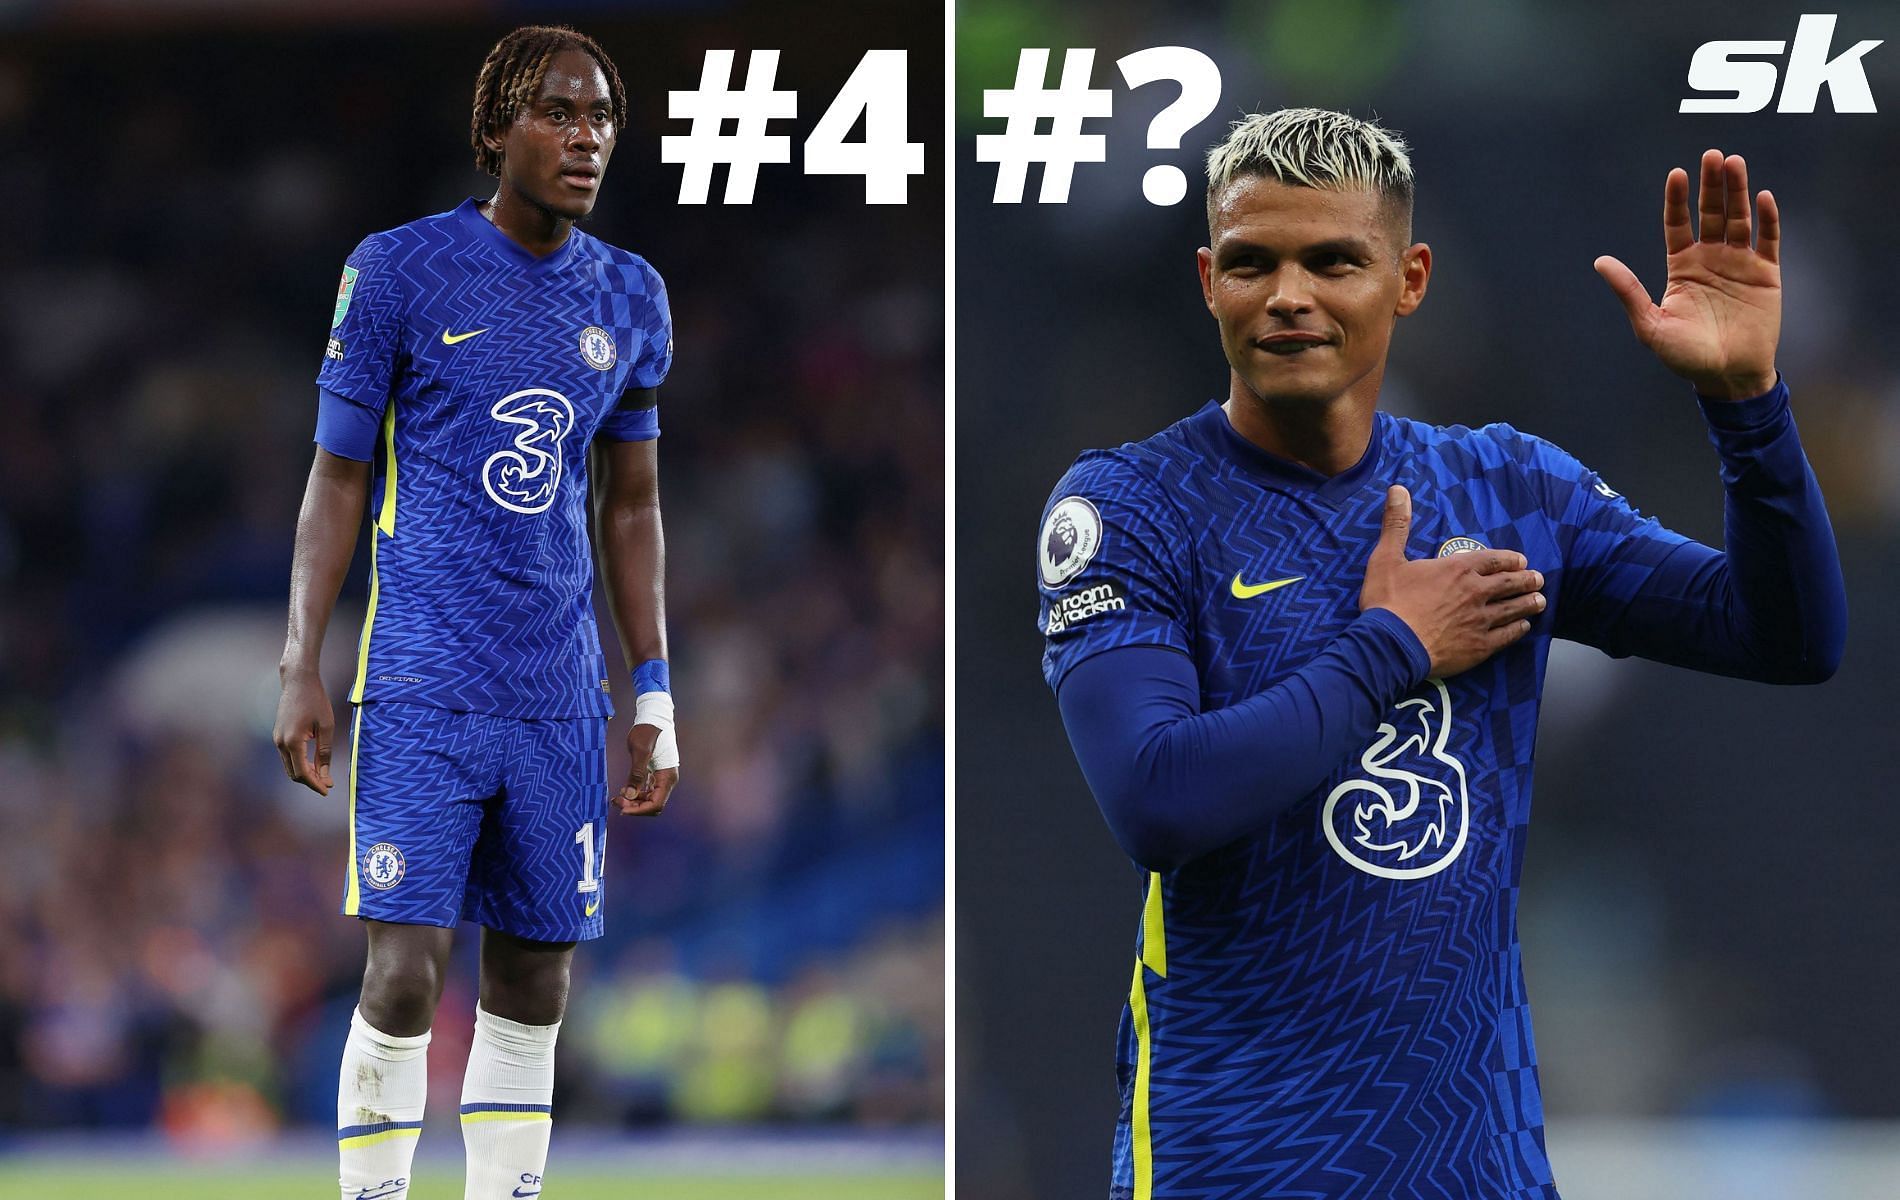 Ranking the 5 best centrebacks in the world right now based on ratings